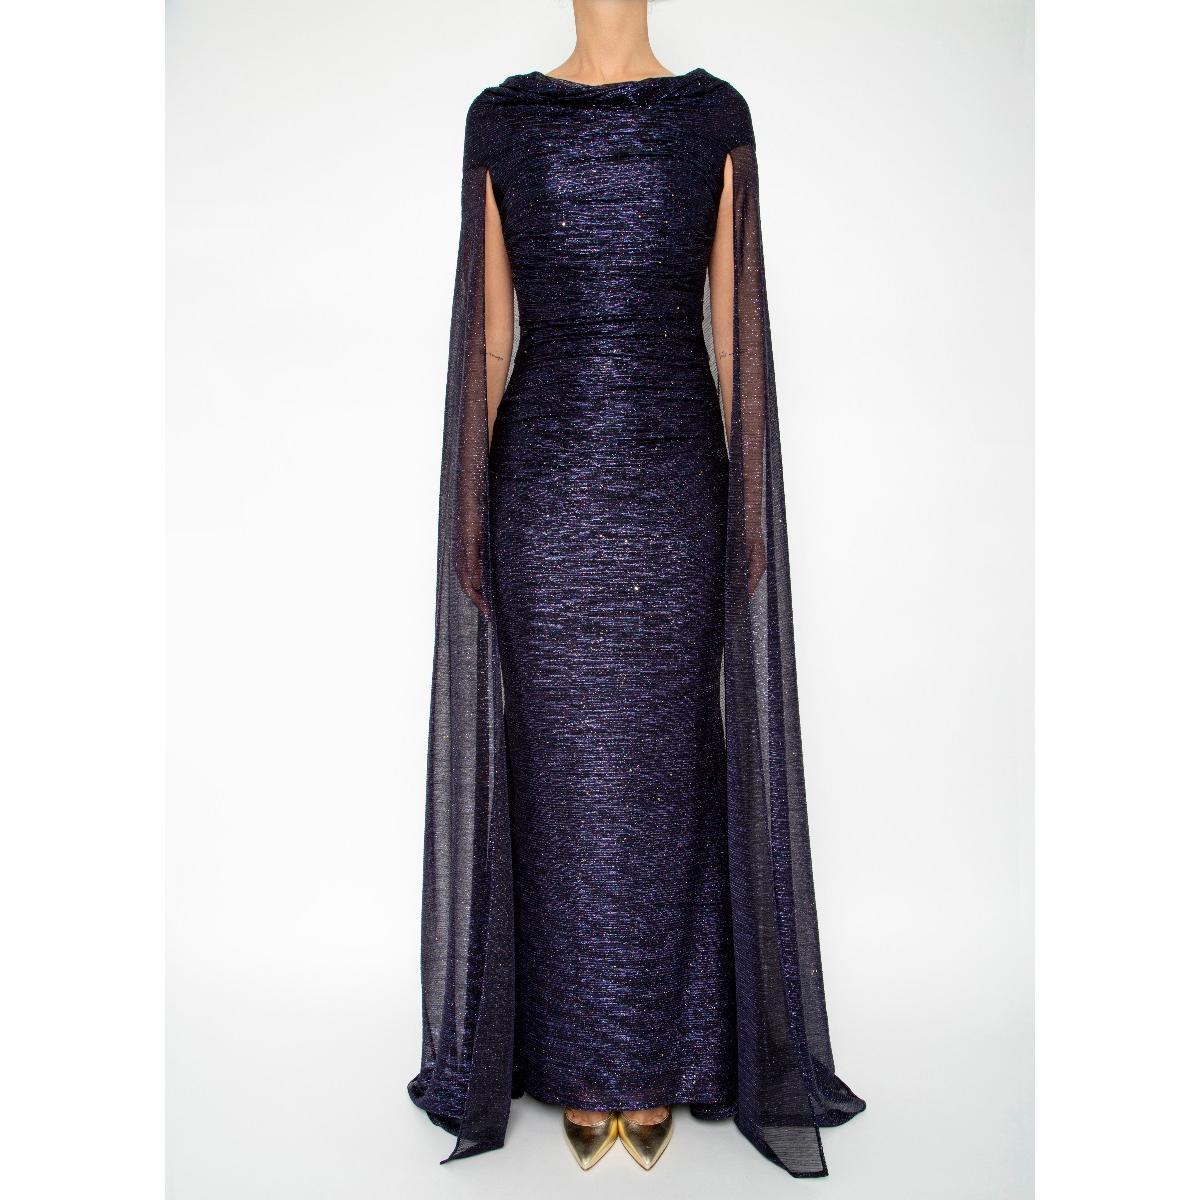 TALBOT RUNHOF 


 Off-the-shoulder neckline. Cape sleeves. Column silhouette. Floor-length hem. Back zip

Main Fabric: 50% Polyester 50% Metal
Lining: 85% Cupro 15% Lycra


IT 42.  Very stretchy, can fit size S and M


Pre owned in excellent